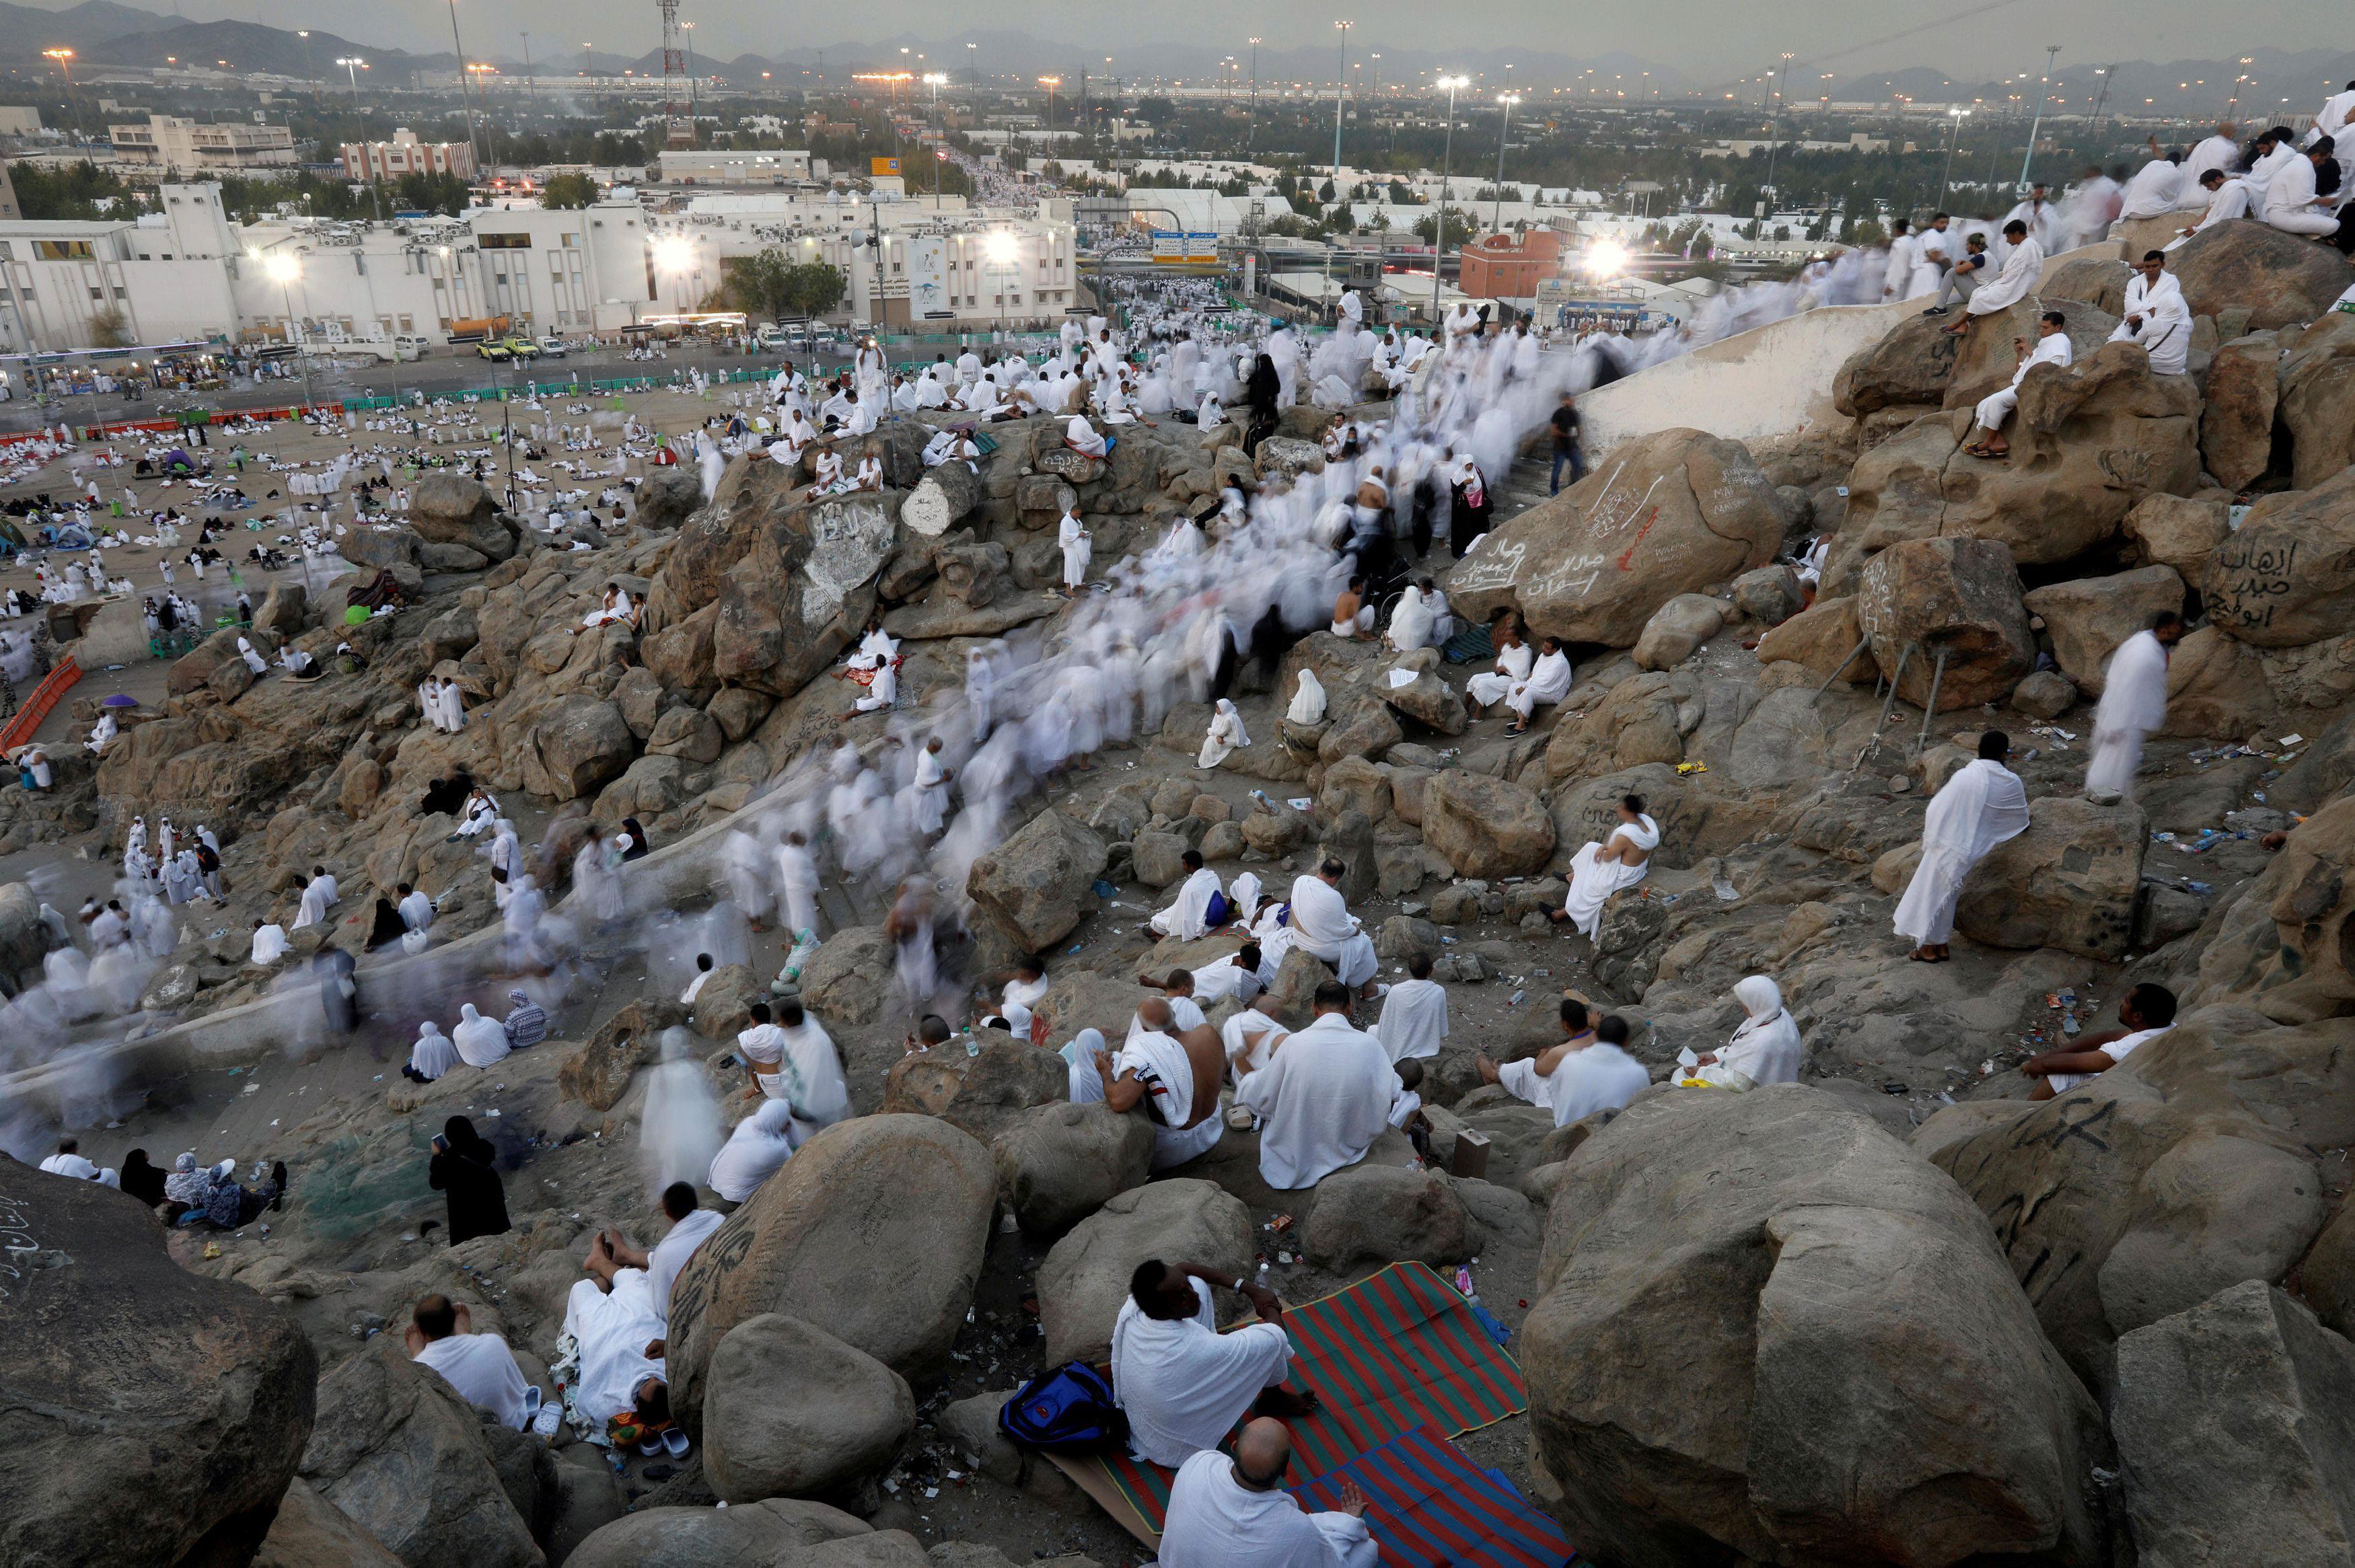 Muslim pilgrims gather on Mount Mercy on the plains of Arafat during the annual haj pilgrimage, outs